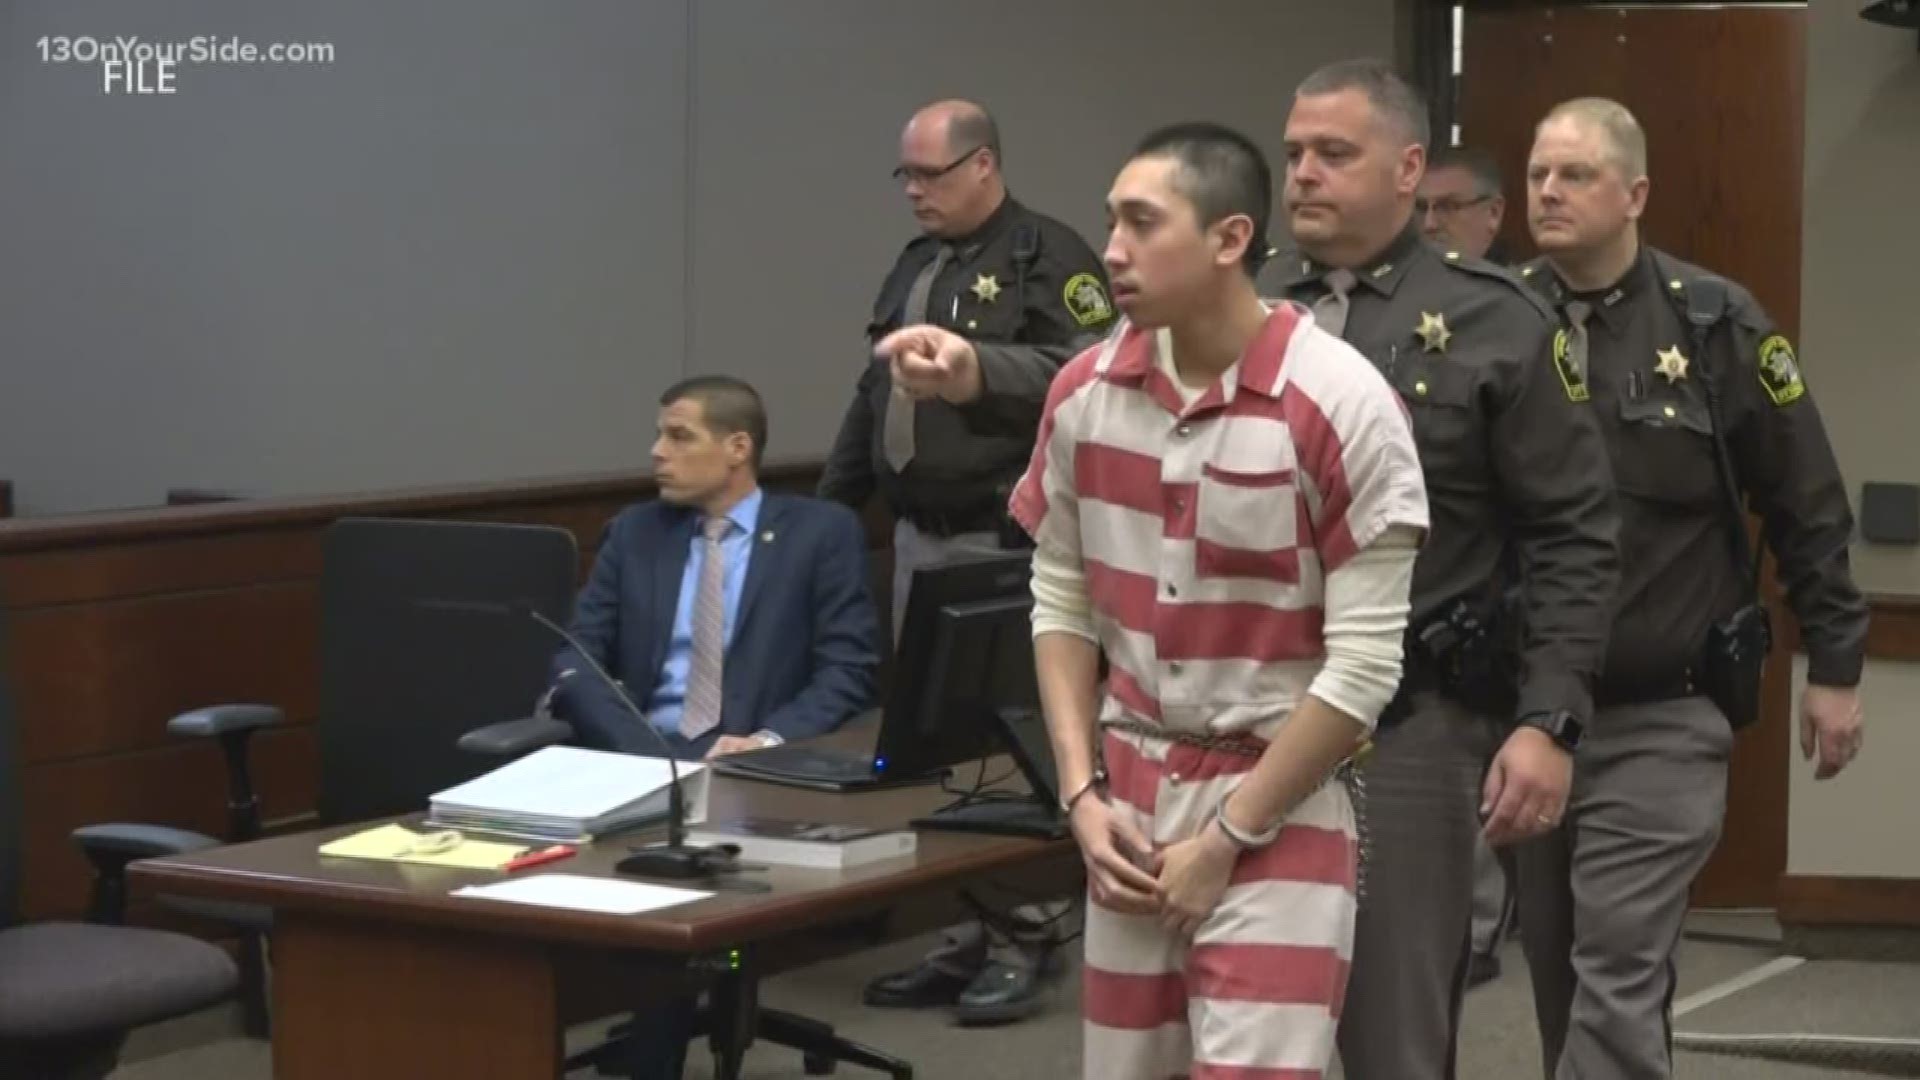 Cabrera was also found guilty of felony firearm and gang membership.